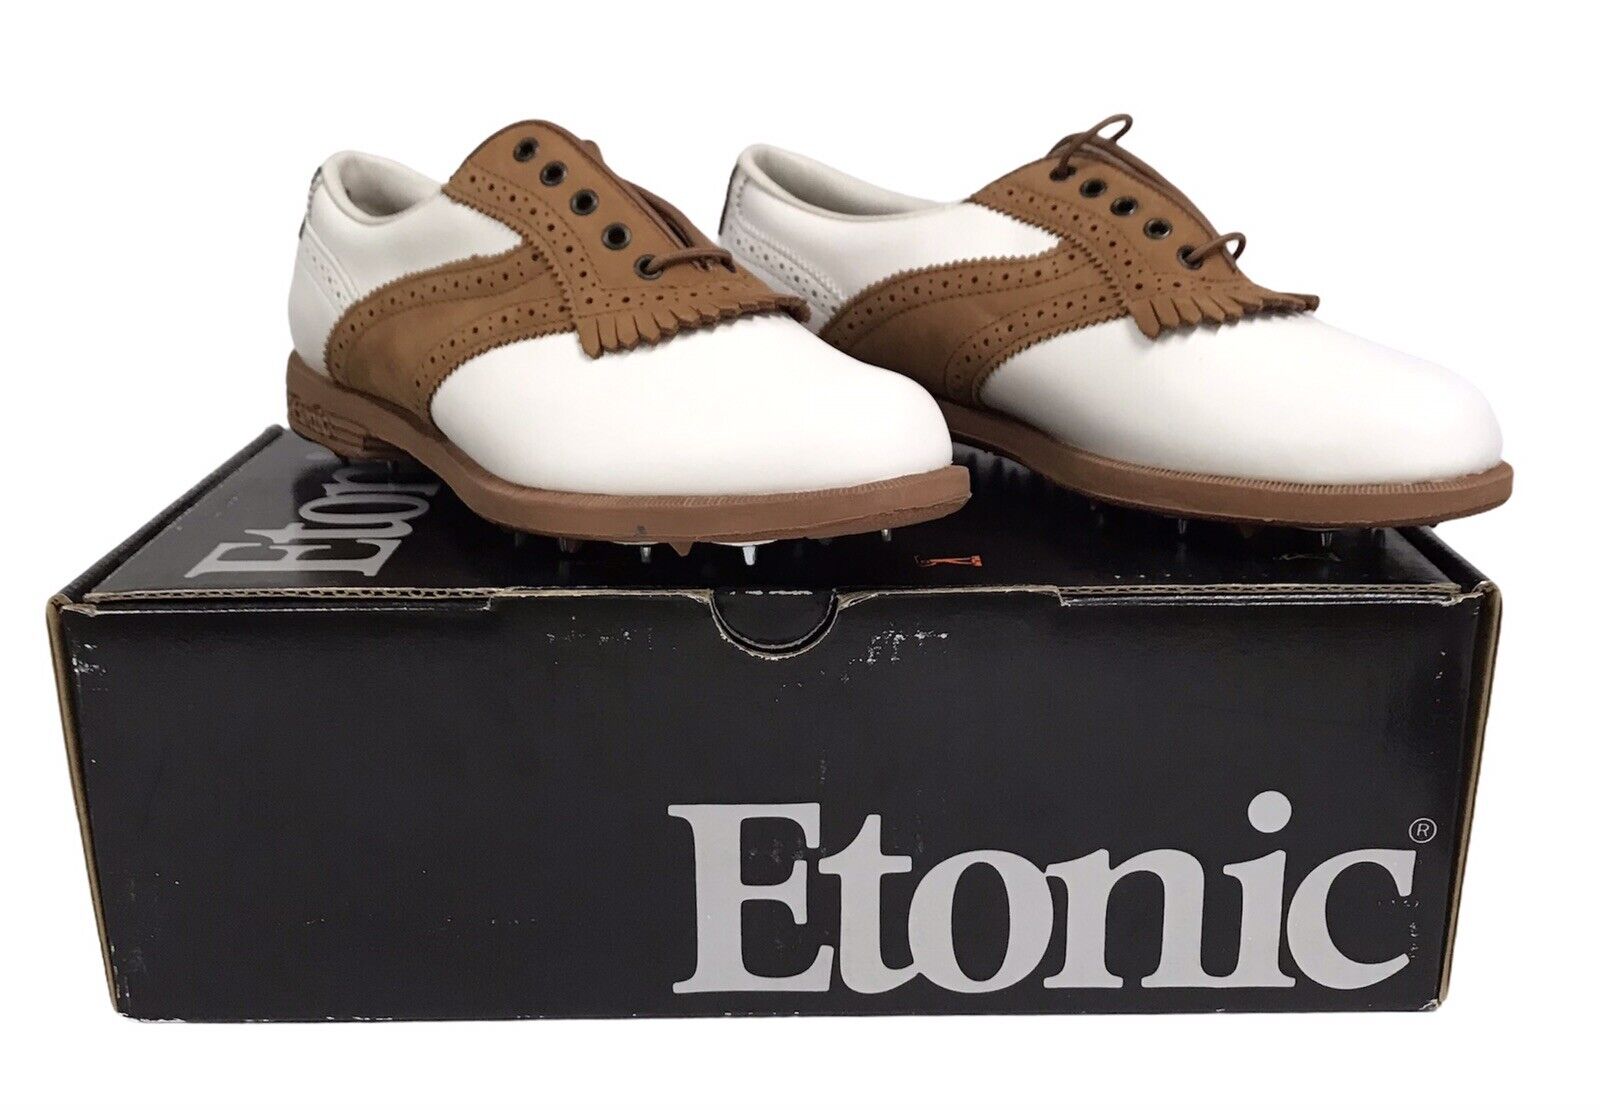 Etonic Womens 4 years warranty 8M Leather Stabilites WhiteTan Golf Limited time trial price Pac Shoes With